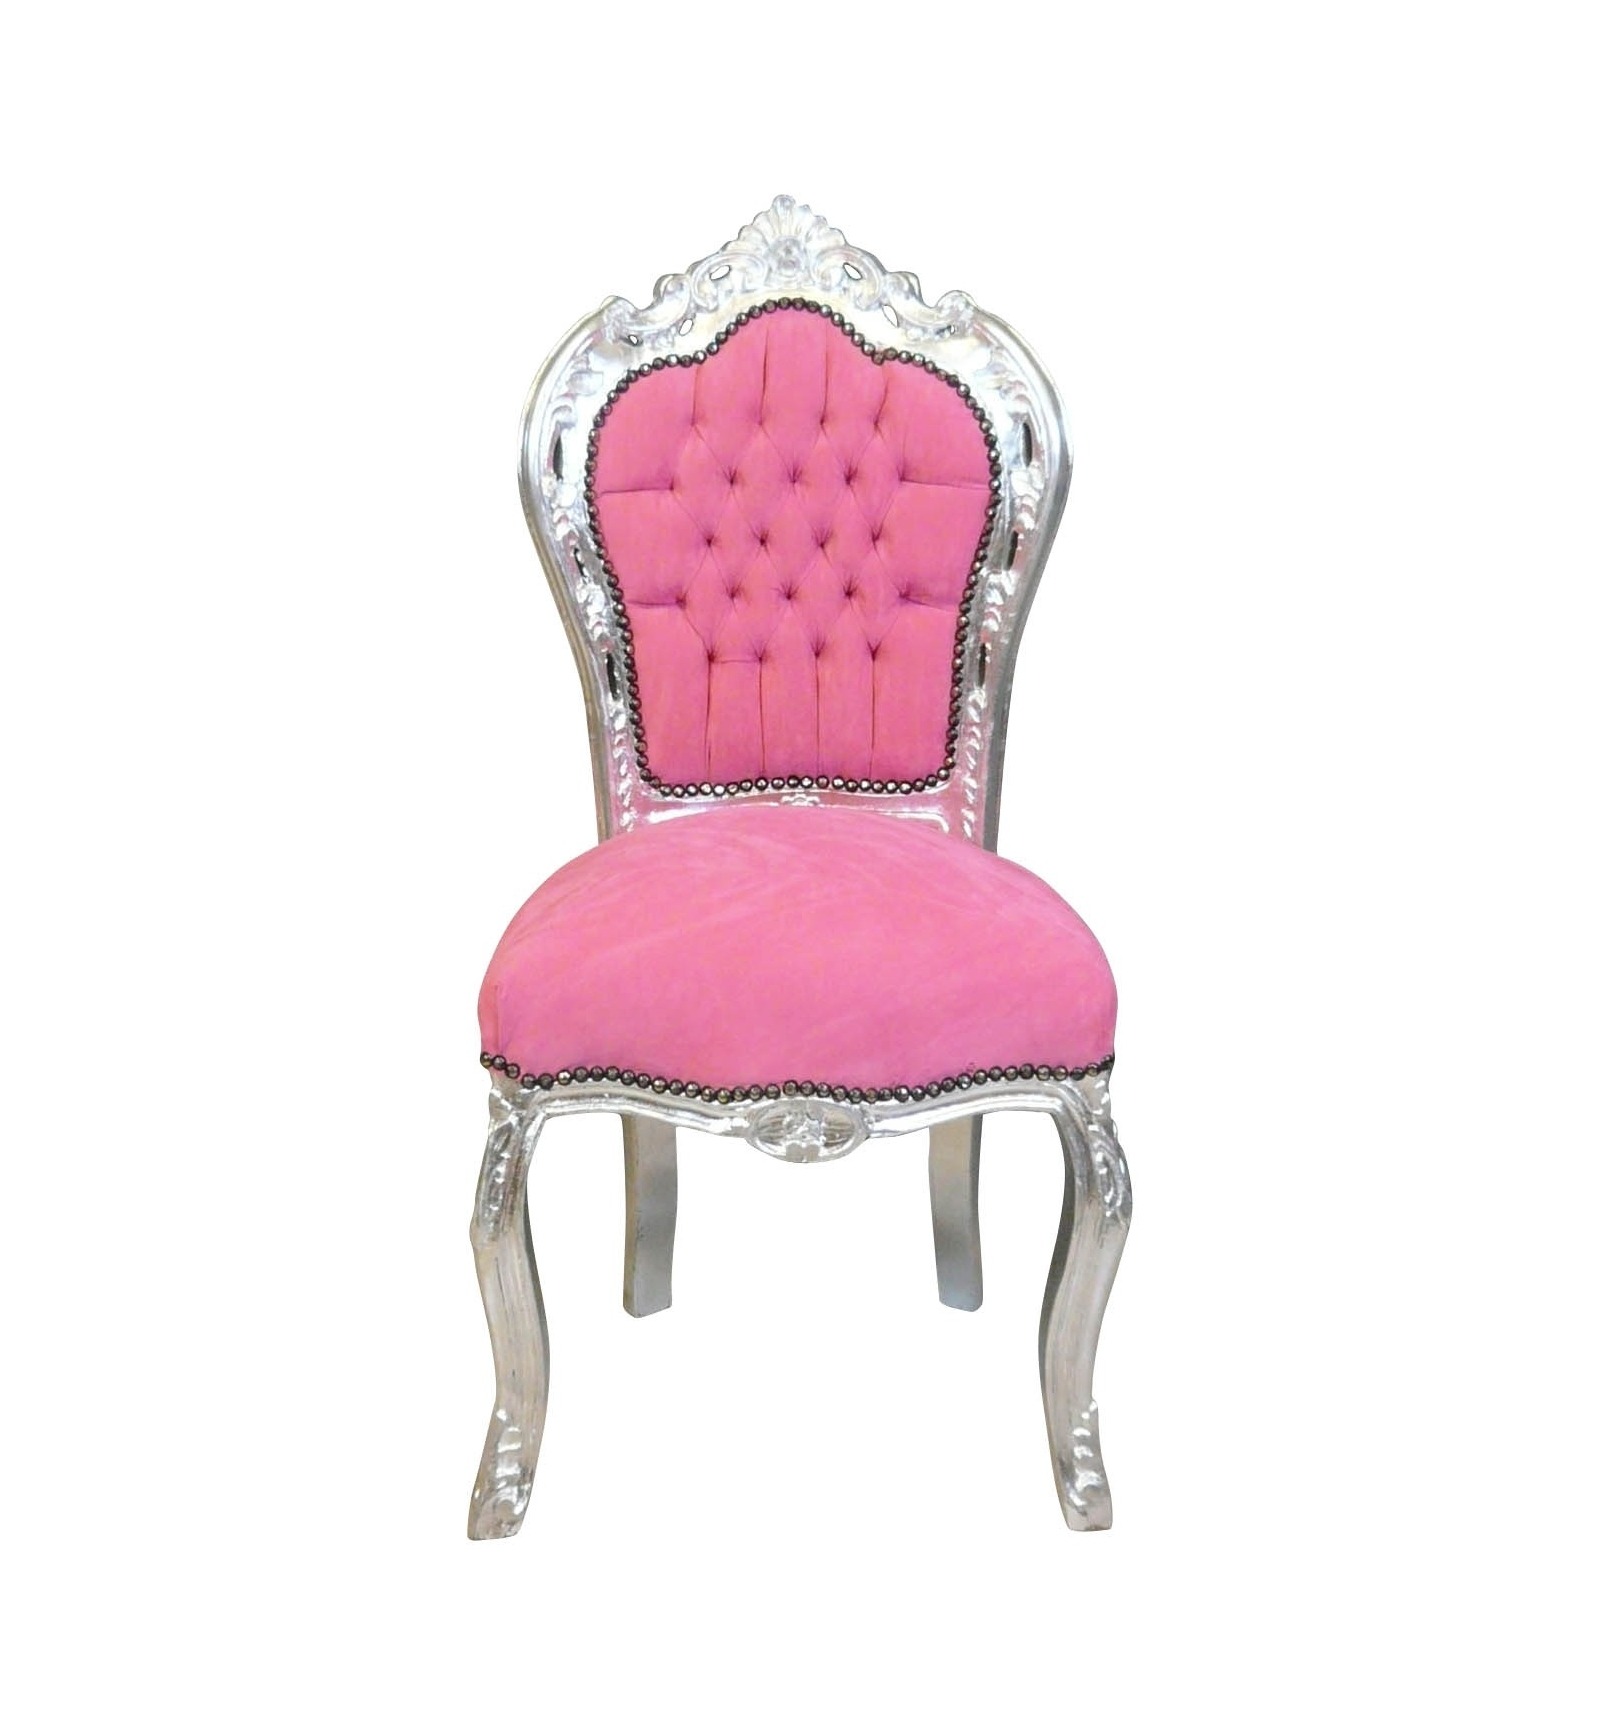 chaise baroque rose et blanche